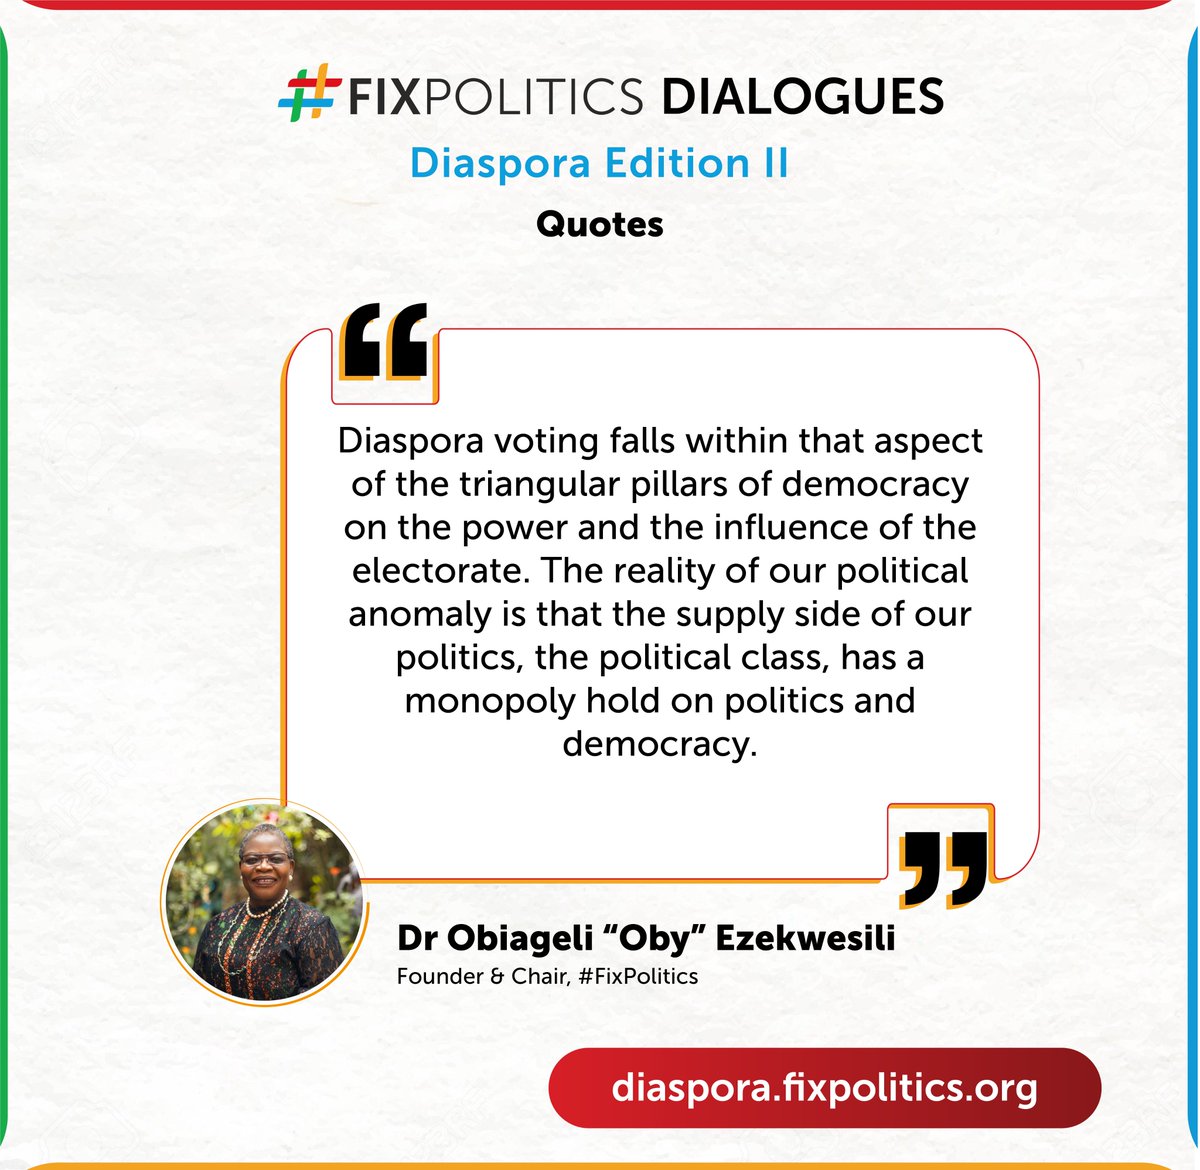 'Diaspora voting falls within that aspect of the triangular pillars of democracy on the power and the influence of the electorate' - Dr Obiageli 'Oby' Ezekwesili @obyezeks at the #FixPolitics Diaspora Dialogue II. Watch this space for the next edition of the Diaspora Dialogue.